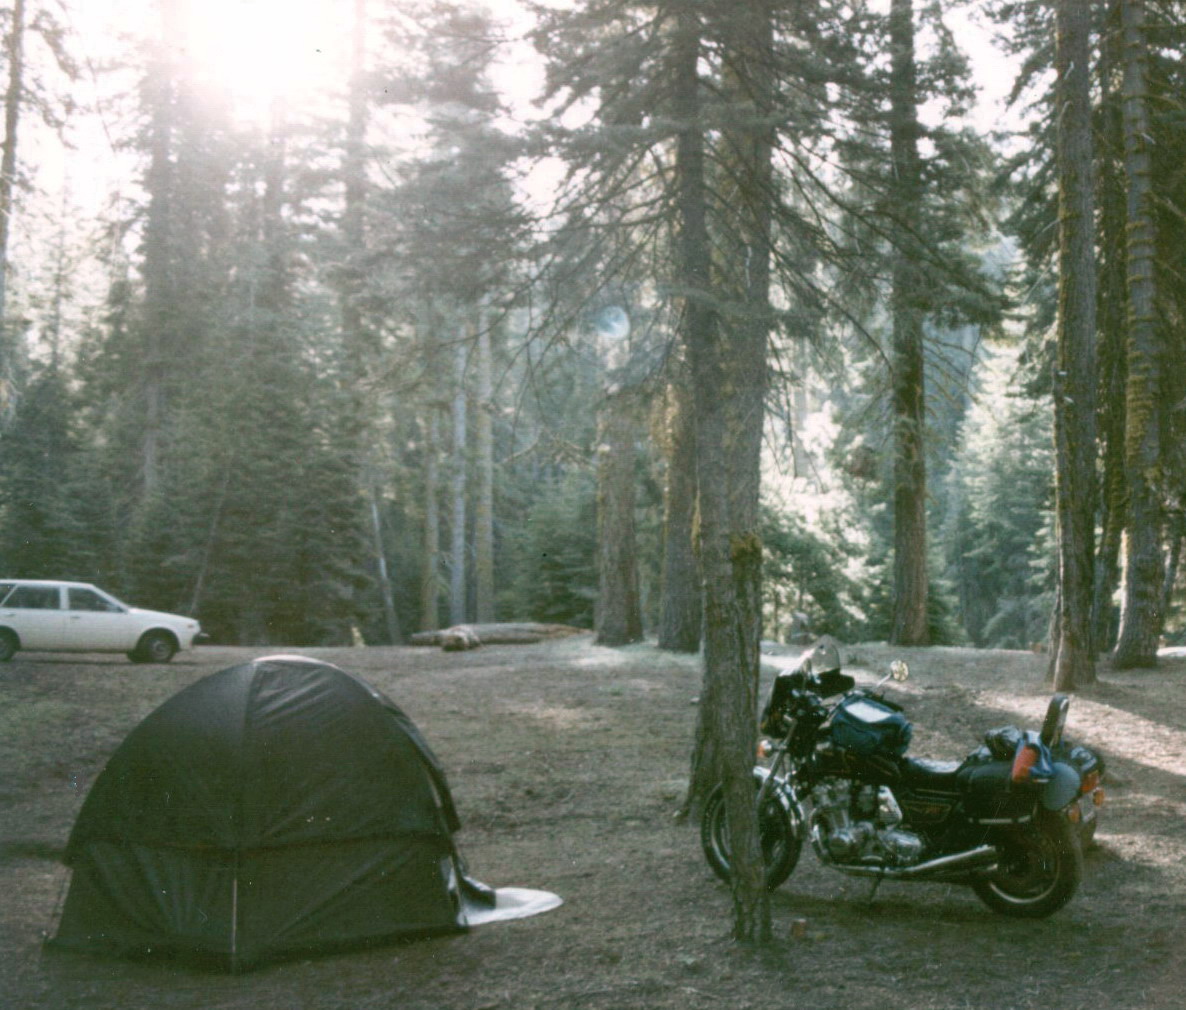 Camping in the Sequoias